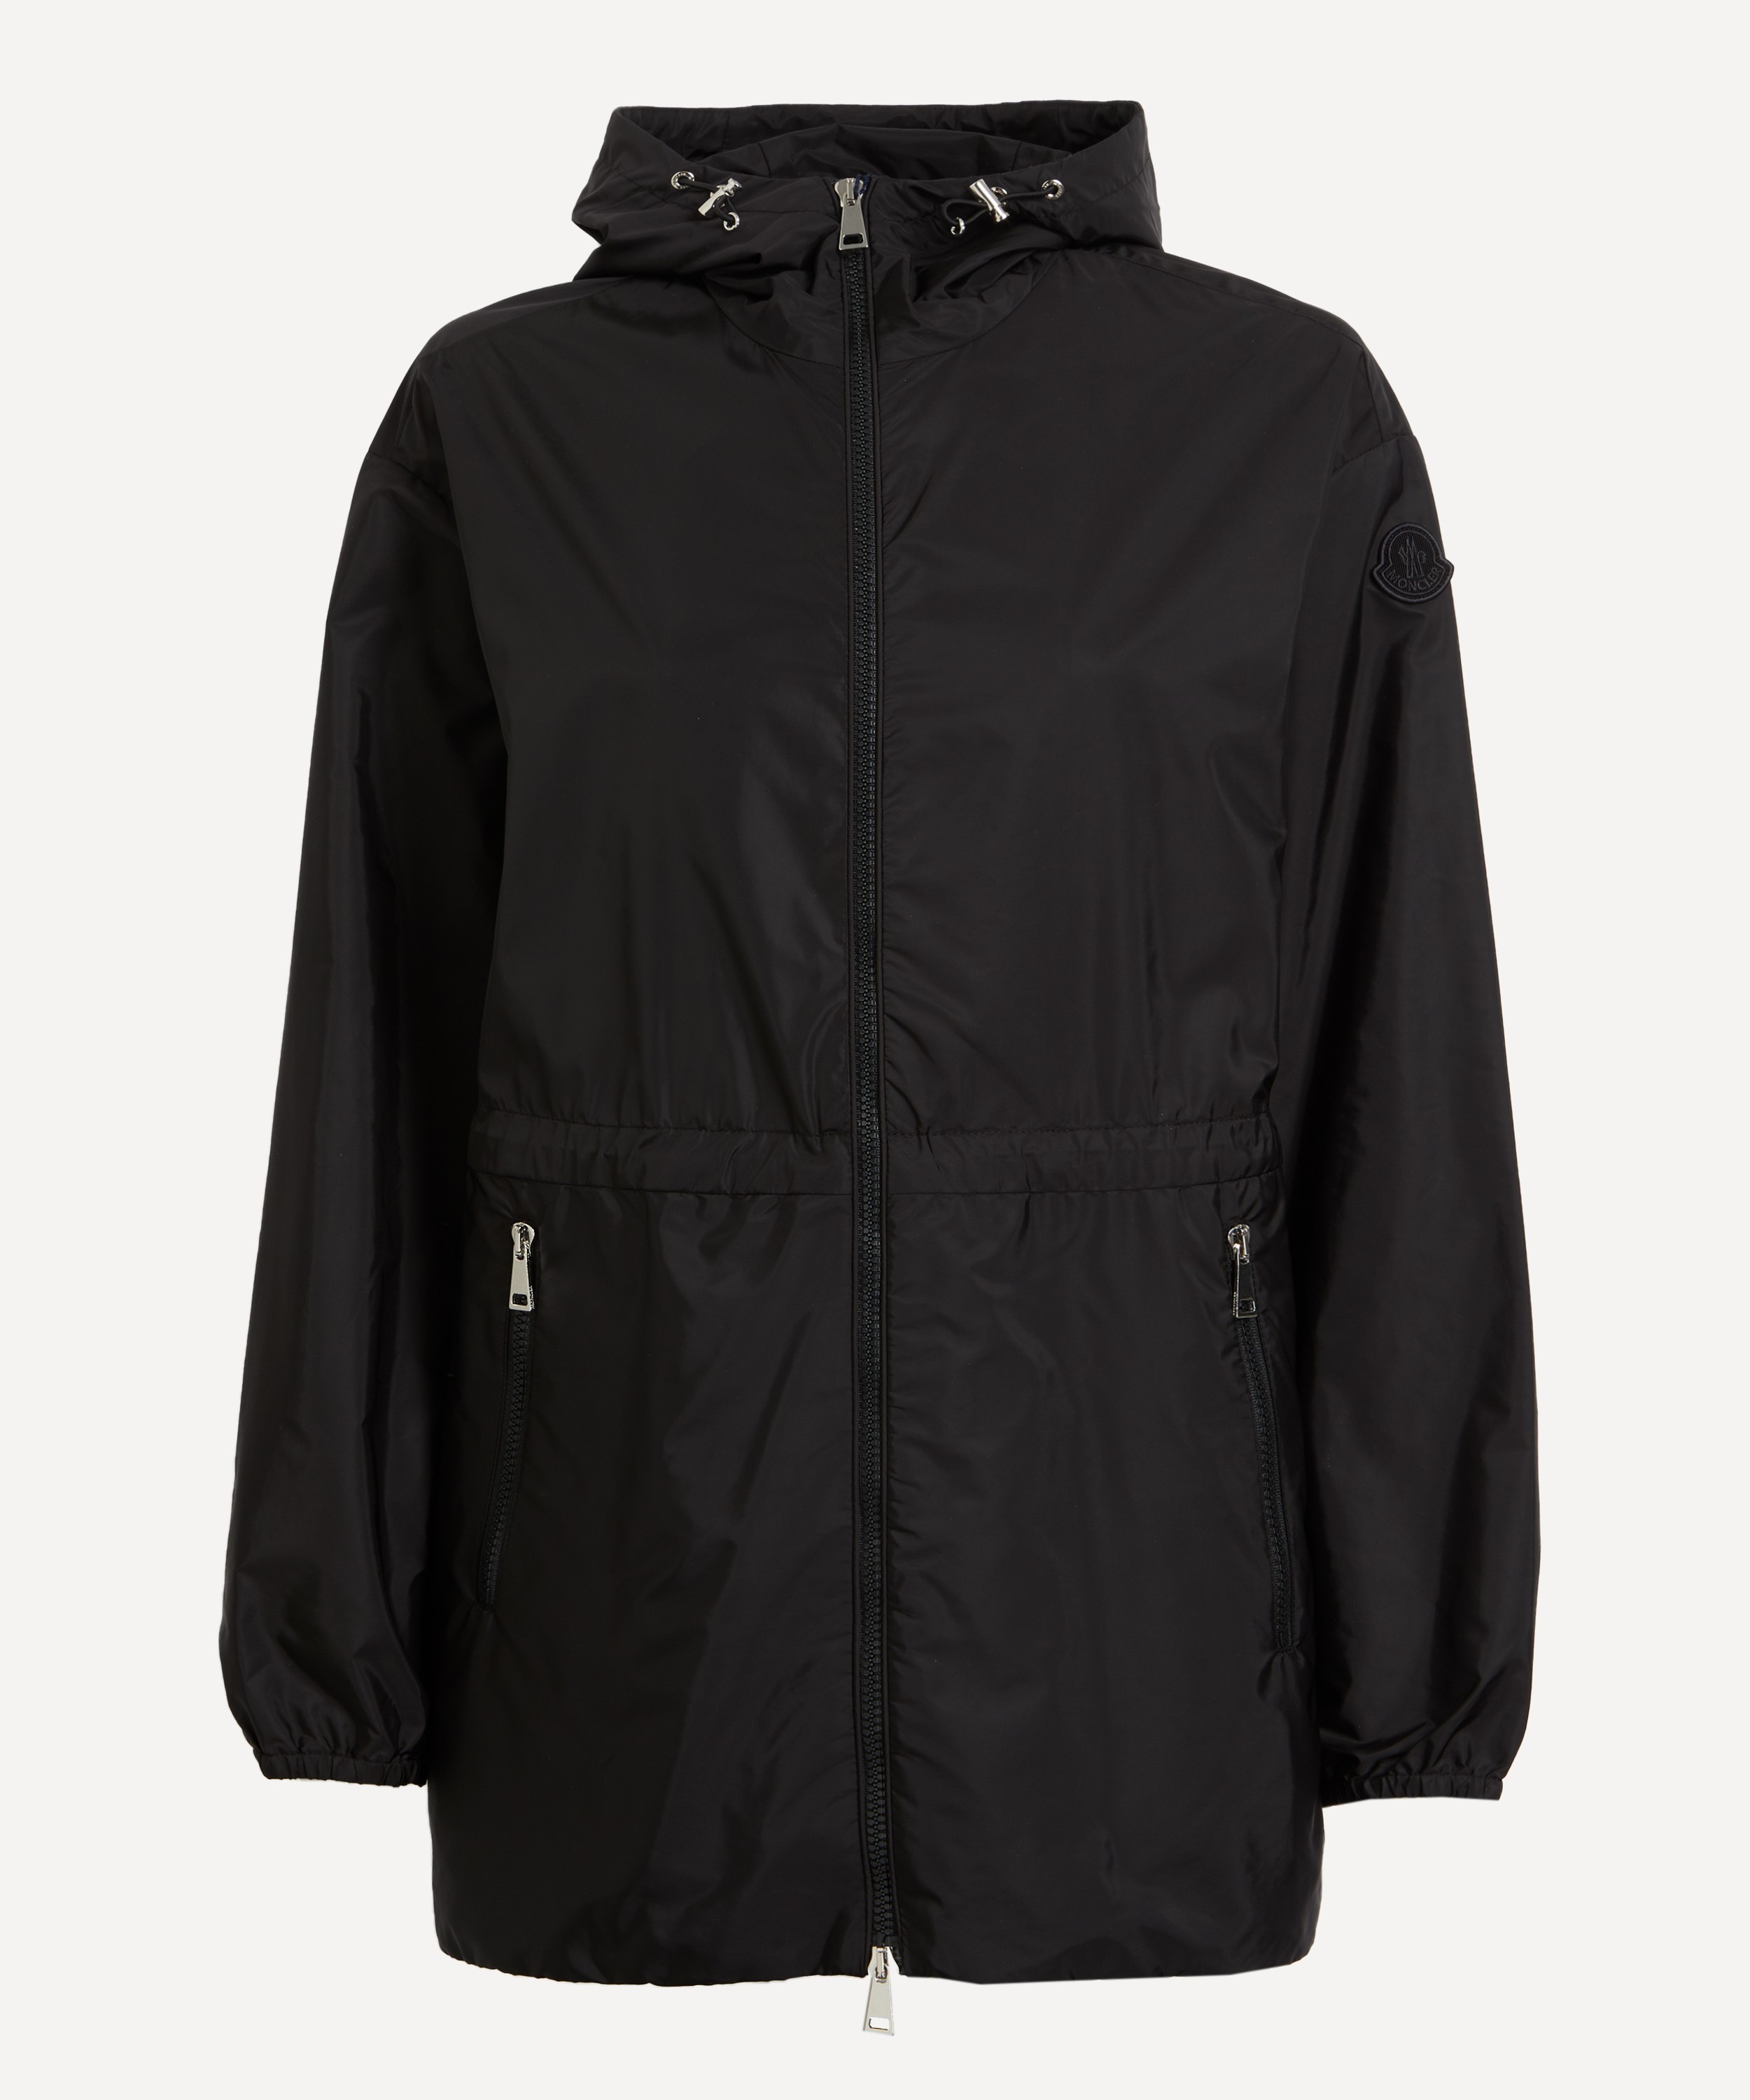 Moncler - Wete Hooded Jacket